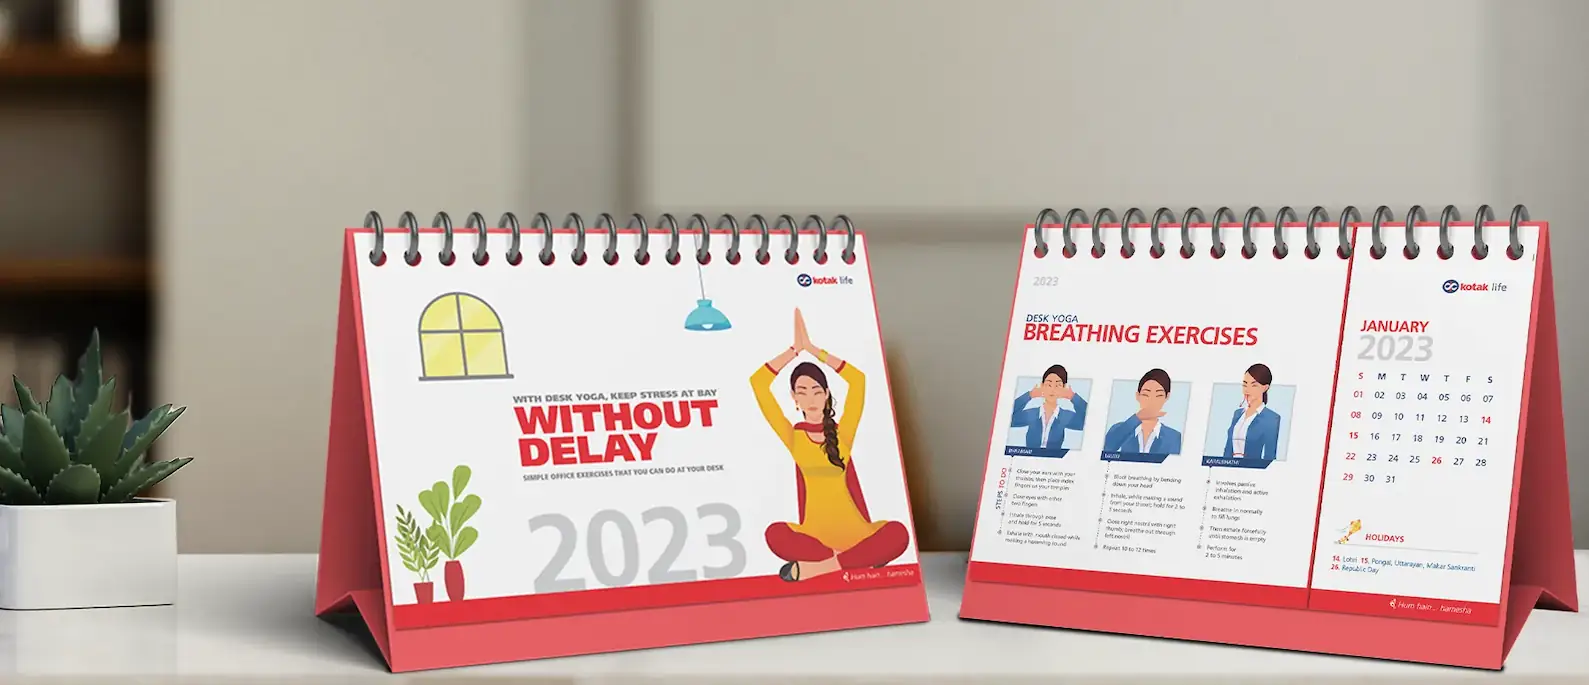 Interactive Calendar Design for Kotak Life - Combining Functionality and Engagement